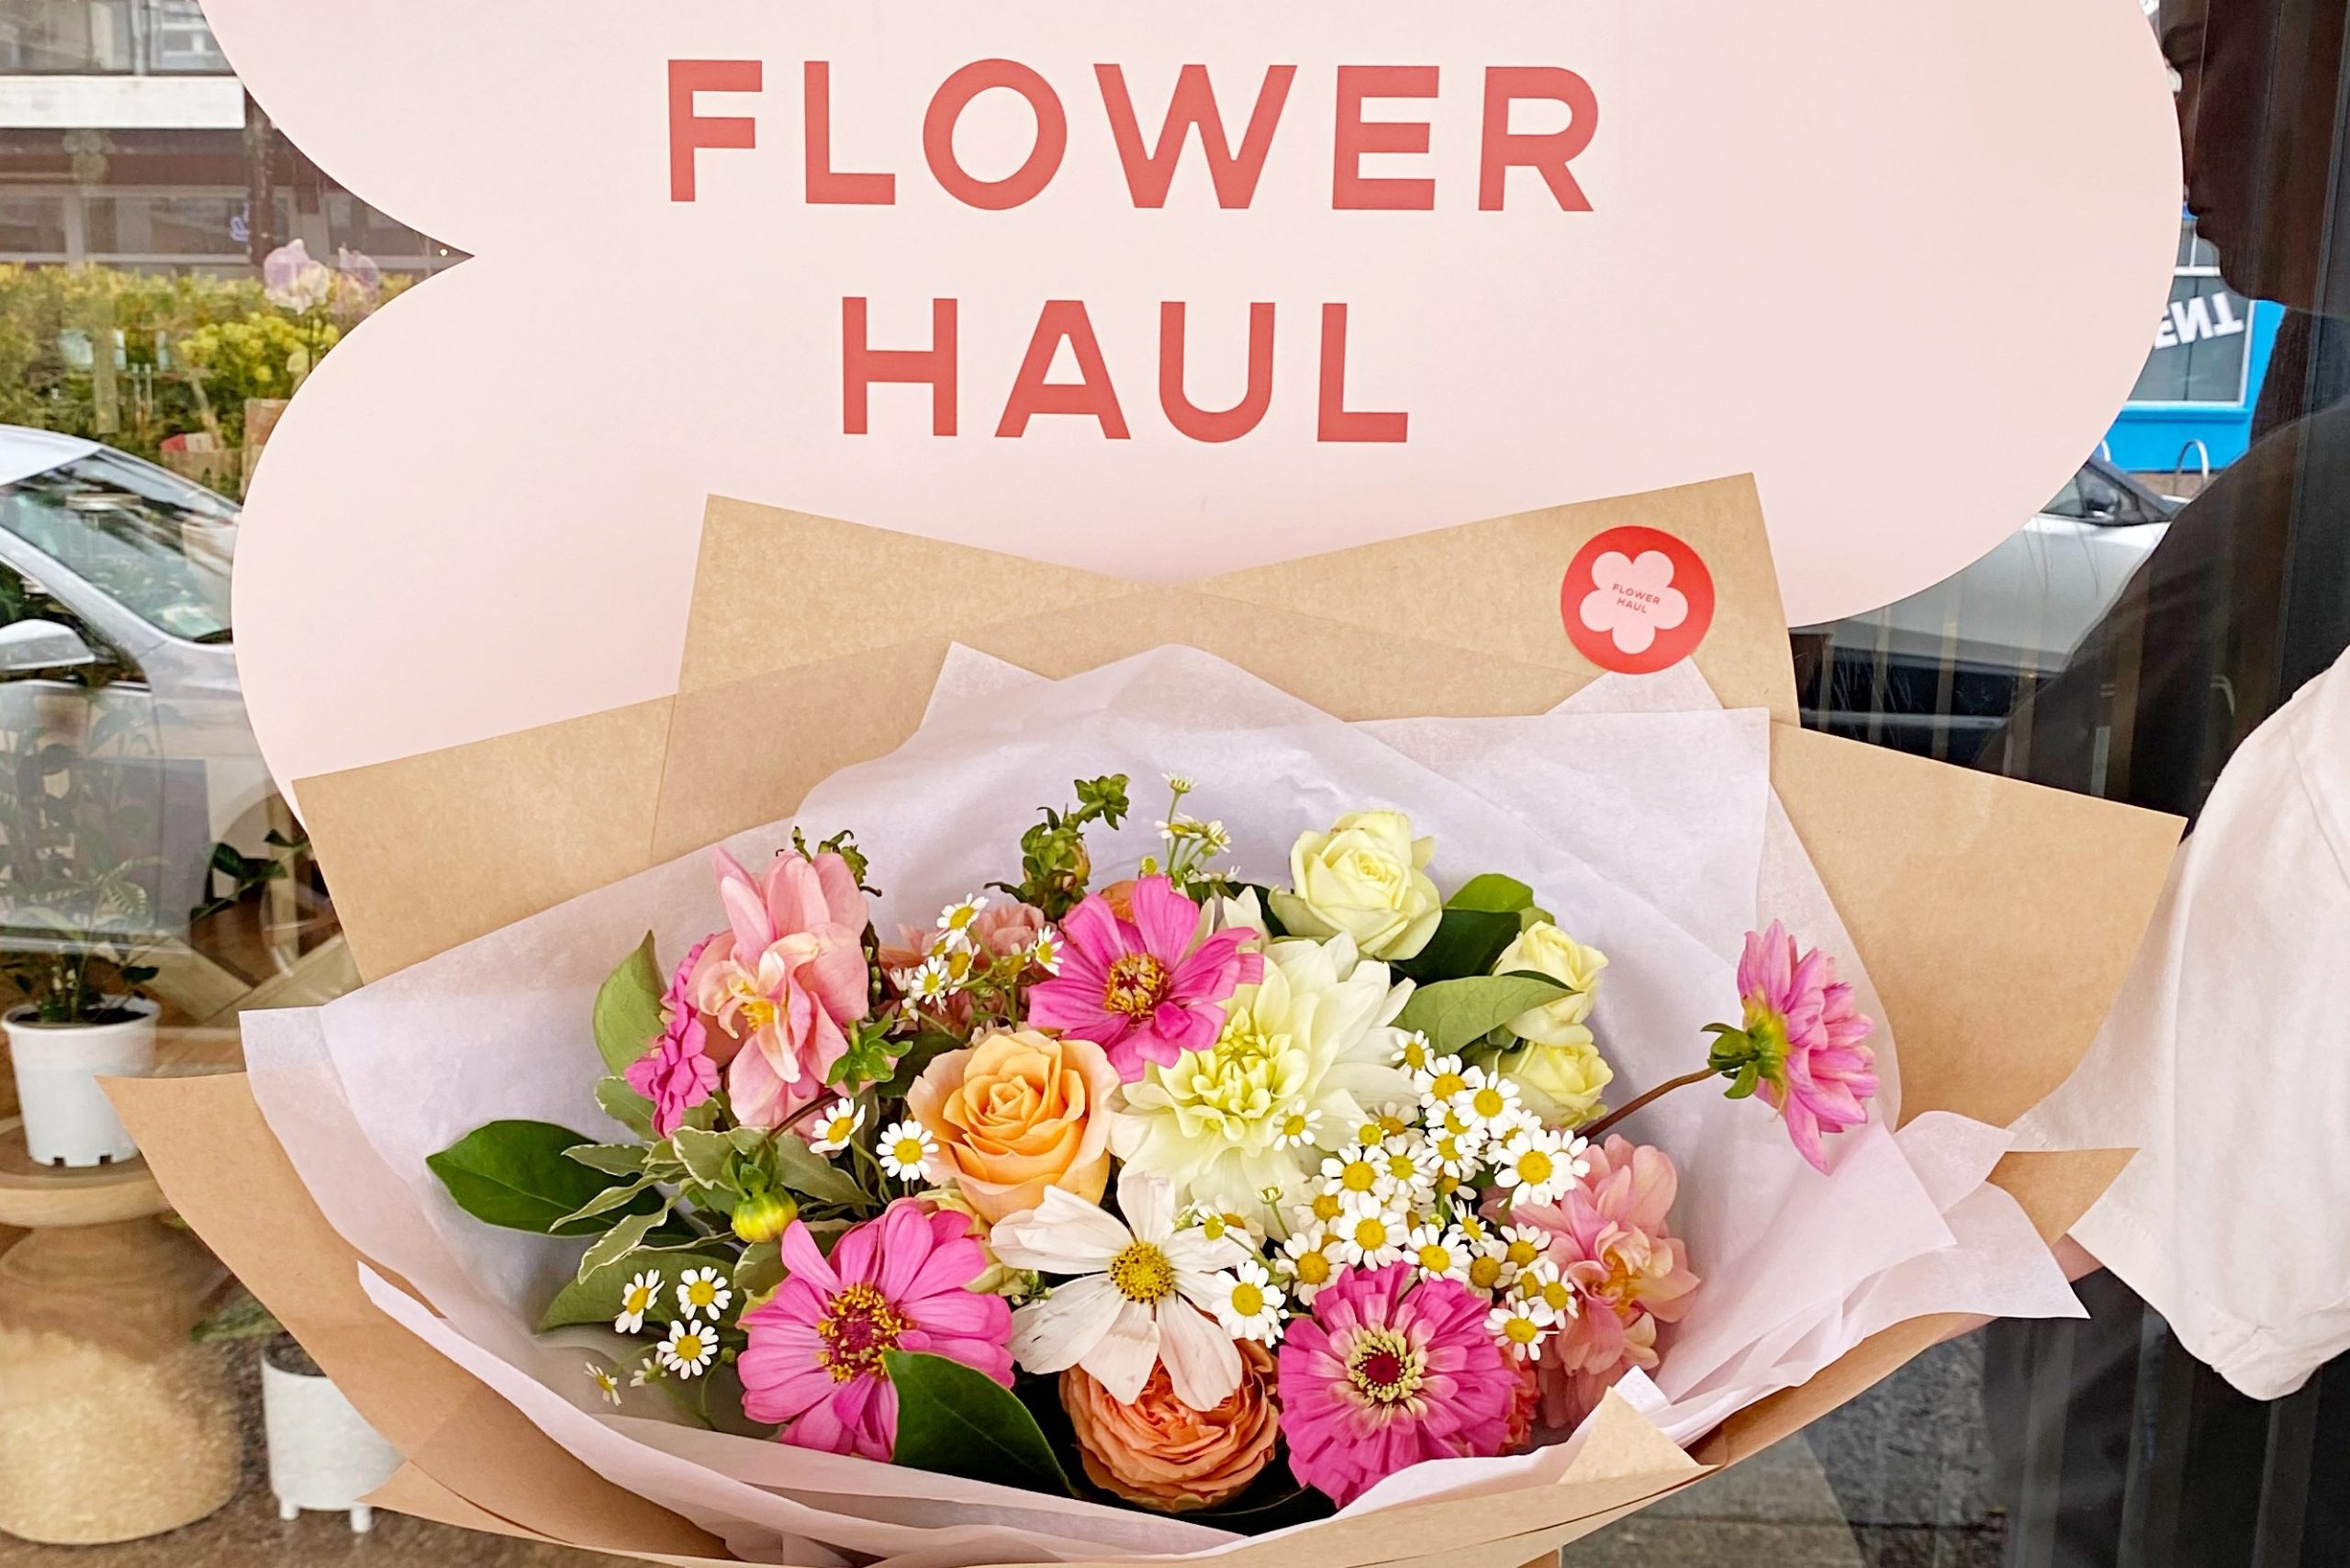 Have you heard of Flower Haul?